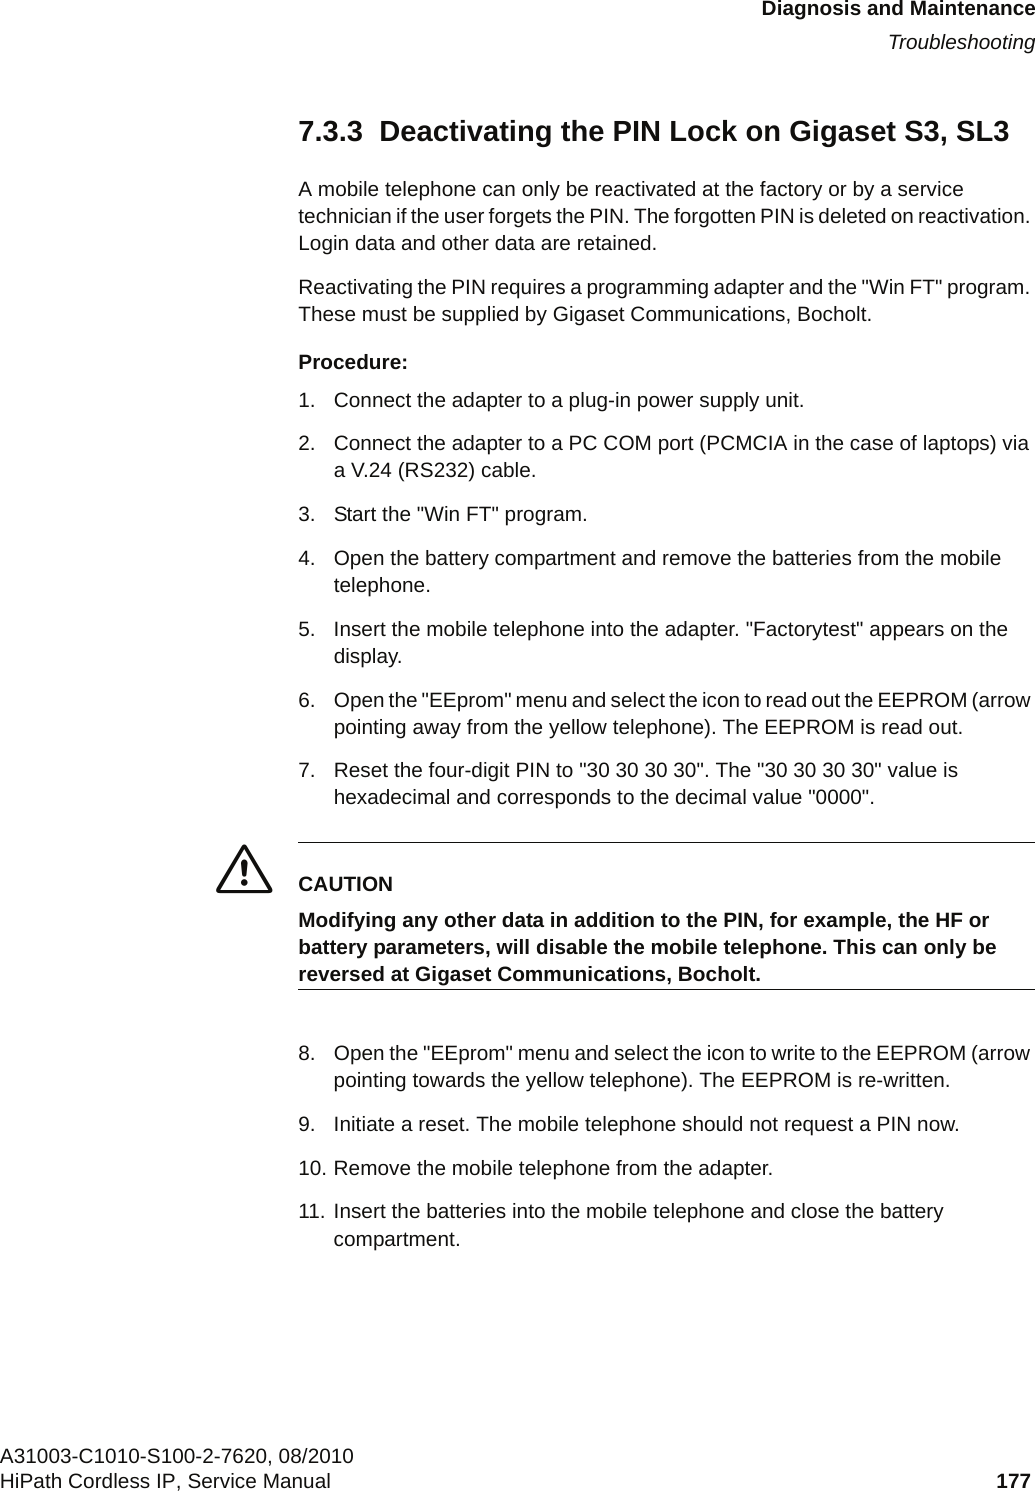 c07.fmDiagnosis and MaintenanceTroubleshootingA31003-C1010-S100-2-7620, 08/2010HiPath Cordless IP, Service Manual 177           7.3.3  Deactivating the PIN Lock on Gigaset S3, SL3A mobile telephone can only be reactivated at the factory or by a service technician if the user forgets the PIN. The forgotten PIN is deleted on reactivation. Login data and other data are retained.Reactivating the PIN requires a programming adapter and the &quot;Win FT&quot; program. These must be supplied by Gigaset Communications, Bocholt.Procedure:1. Connect the adapter to a plug-in power supply unit.2. Connect the adapter to a PC COM port (PCMCIA in the case of laptops) via a V.24 (RS232) cable.3. Start the &quot;Win FT&quot; program.4. Open the battery compartment and remove the batteries from the mobile telephone.5. Insert the mobile telephone into the adapter. &quot;Factorytest&quot; appears on the display.6. Open the &quot;EEprom&quot; menu and select the icon to read out the EEPROM (arrow pointing away from the yellow telephone). The EEPROM is read out.7. Reset the four-digit PIN to &quot;30 30 30 30&quot;. The &quot;30 30 30 30&quot; value is hexadecimal and corresponds to the decimal value &quot;0000&quot;.7CAUTIONModifying any other data in addition to the PIN, for example, the HF or battery parameters, will disable the mobile telephone. This can only be reversed at Gigaset Communications, Bocholt.8. Open the &quot;EEprom&quot; menu and select the icon to write to the EEPROM (arrow pointing towards the yellow telephone). The EEPROM is re-written.9. Initiate a reset. The mobile telephone should not request a PIN now.10. Remove the mobile telephone from the adapter.11. Insert the batteries into the mobile telephone and close the battery compartment.